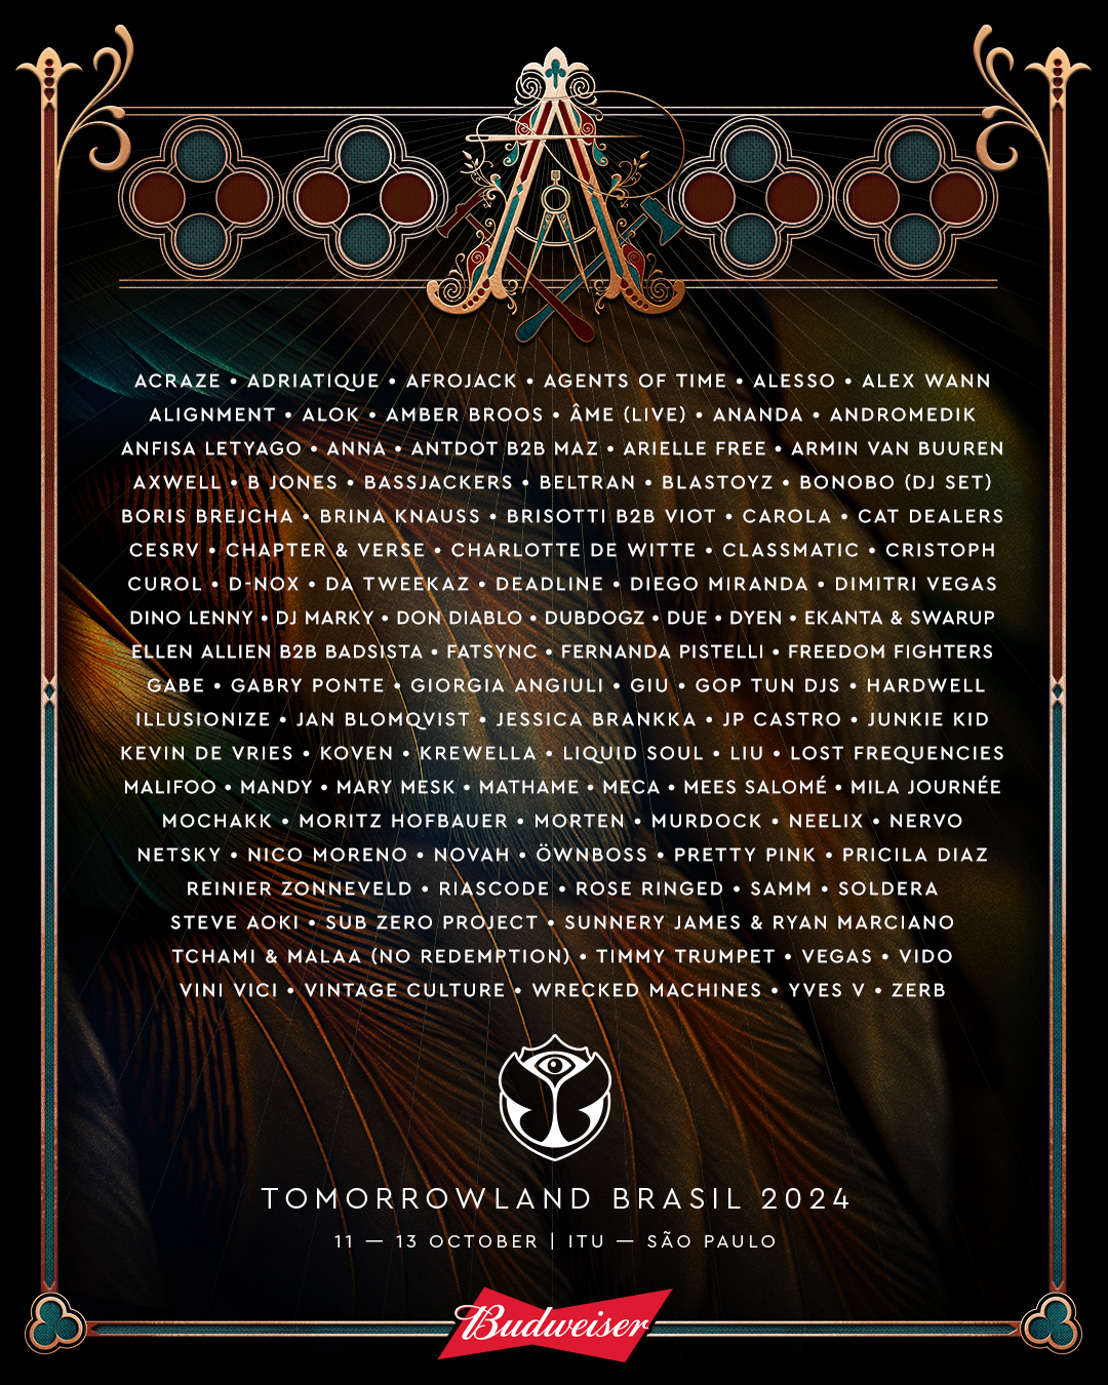 Discover the line-up for Tomorrowland Brasil 2024